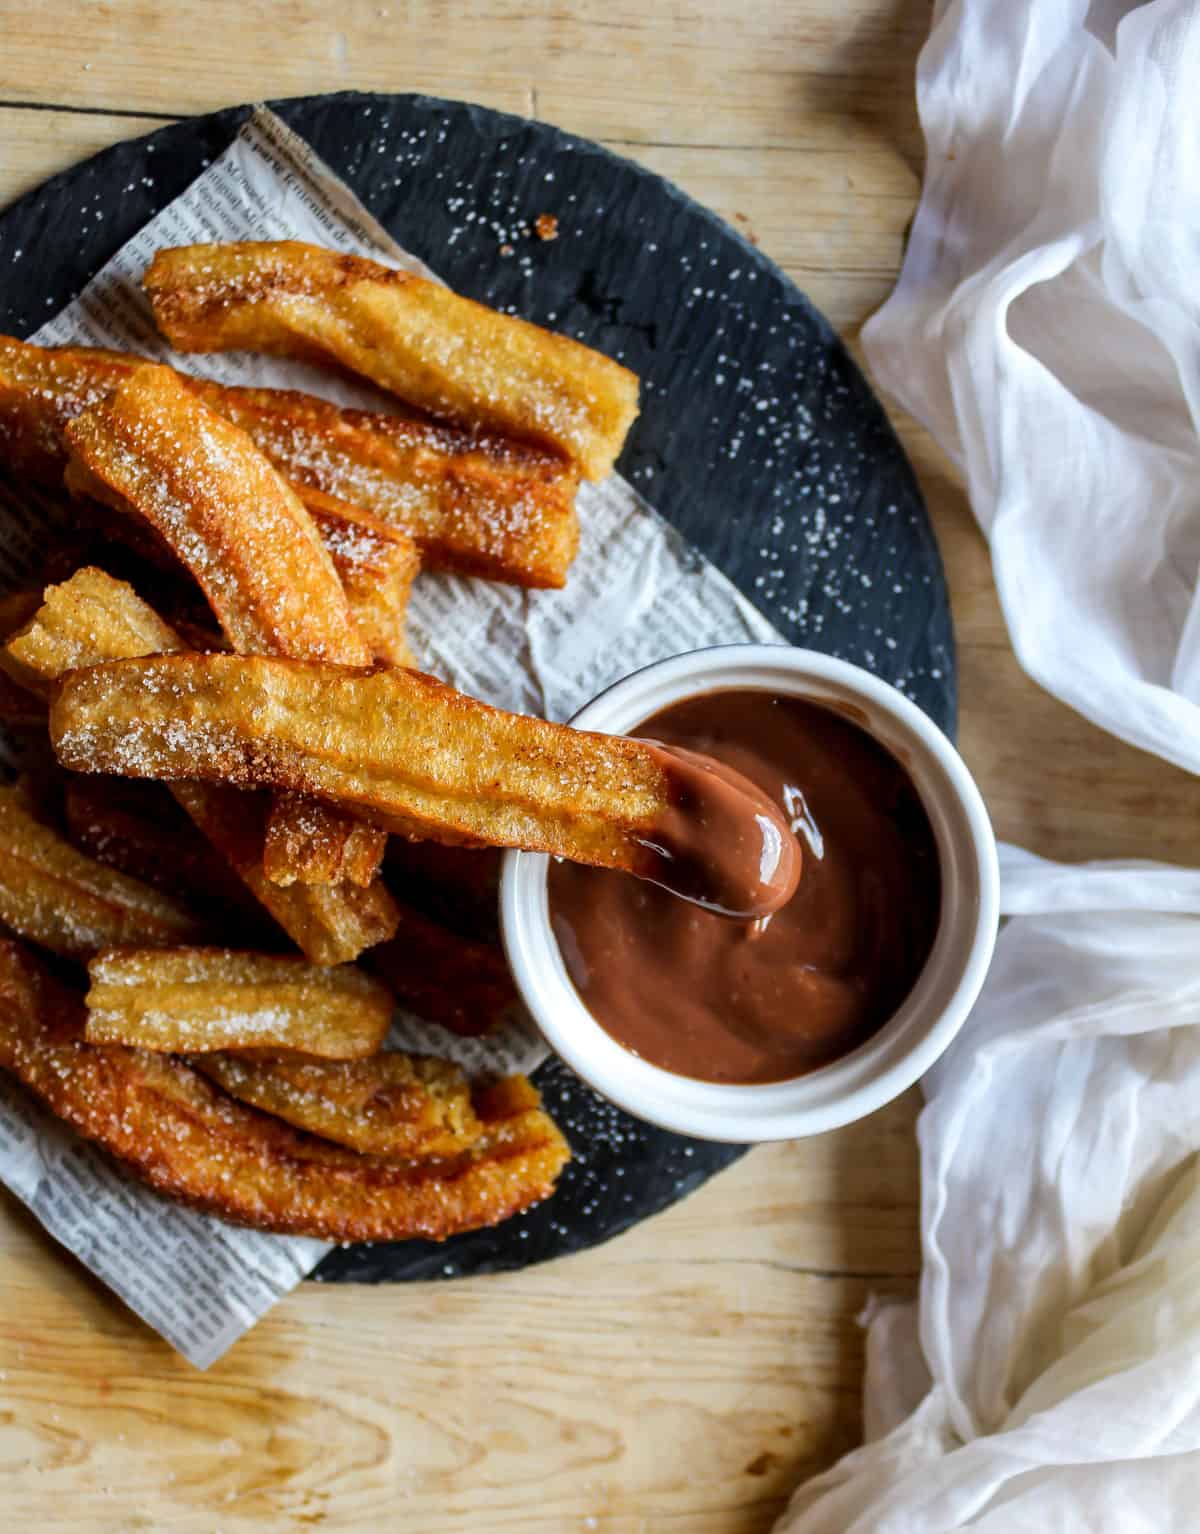 Plate of churros with one in chocolate sauce.